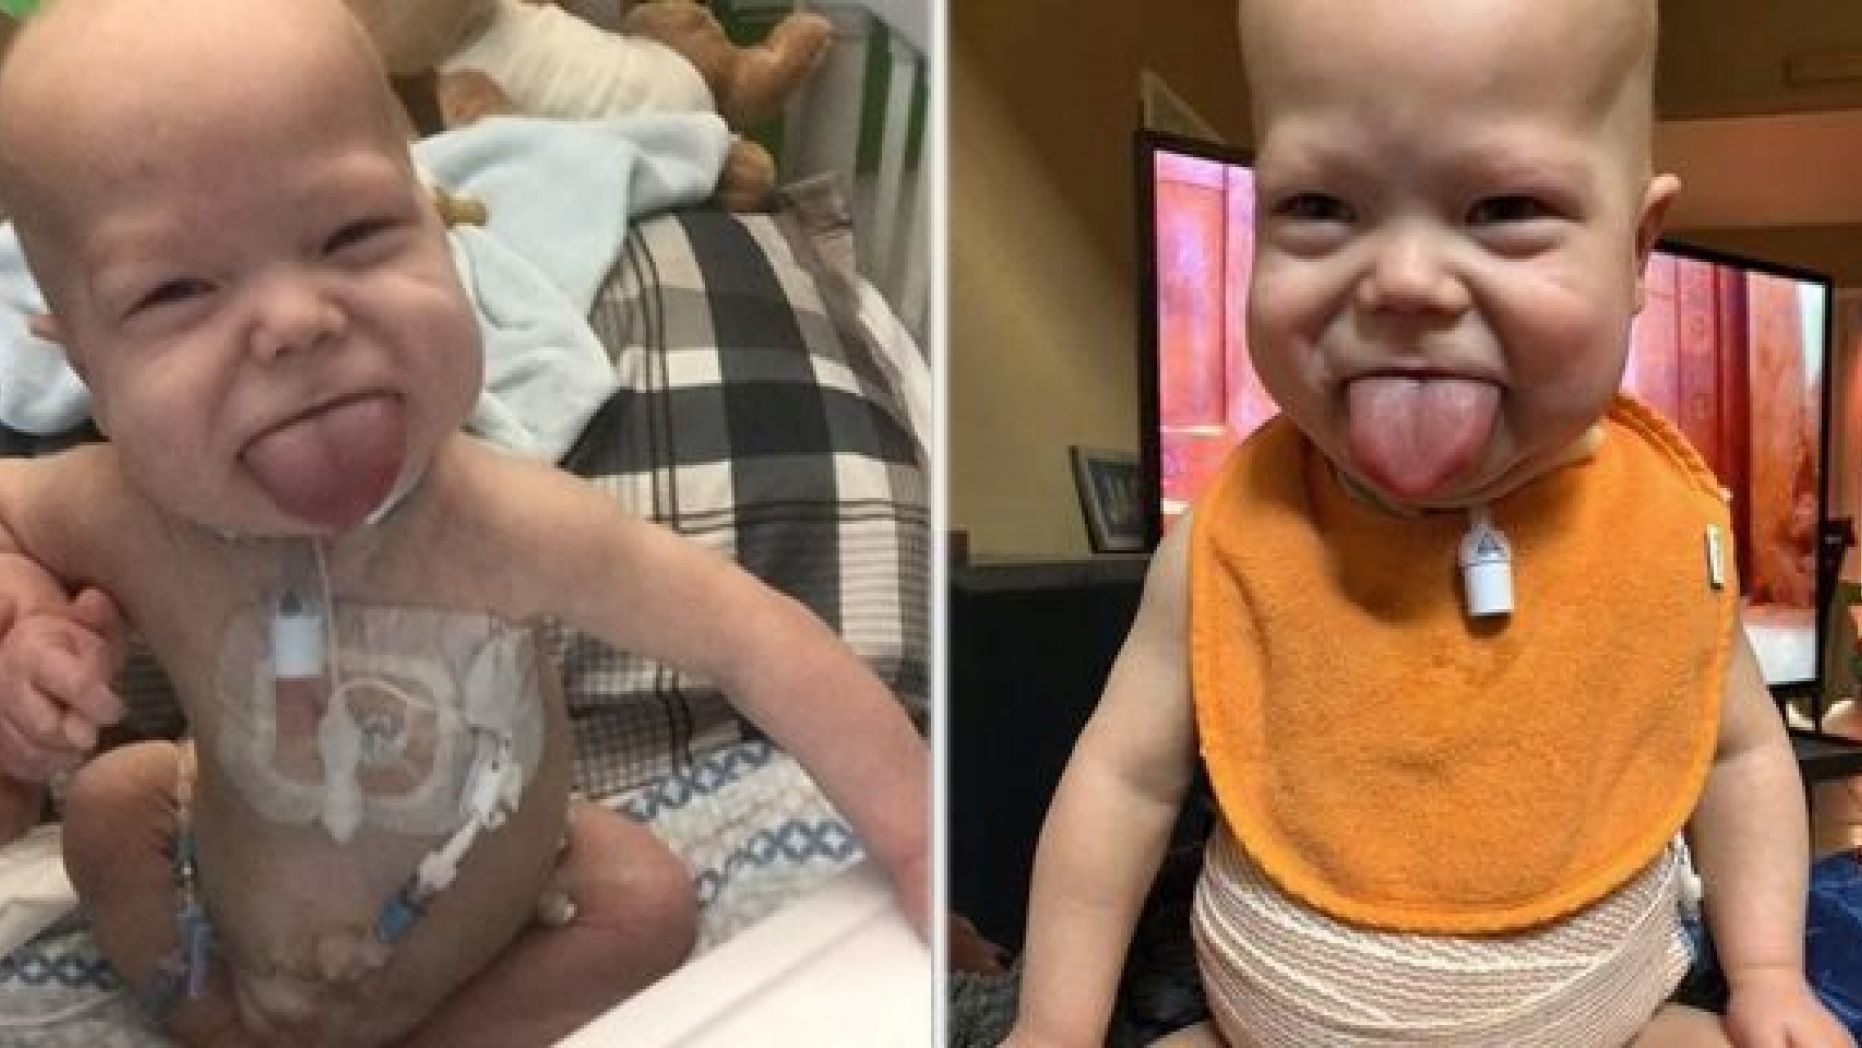 The Oklahoma toddler has a rare condition known as Beckwith-Wiedemann Syndrome, which causes his tongue to be abnormally large. (Caters News Agency)